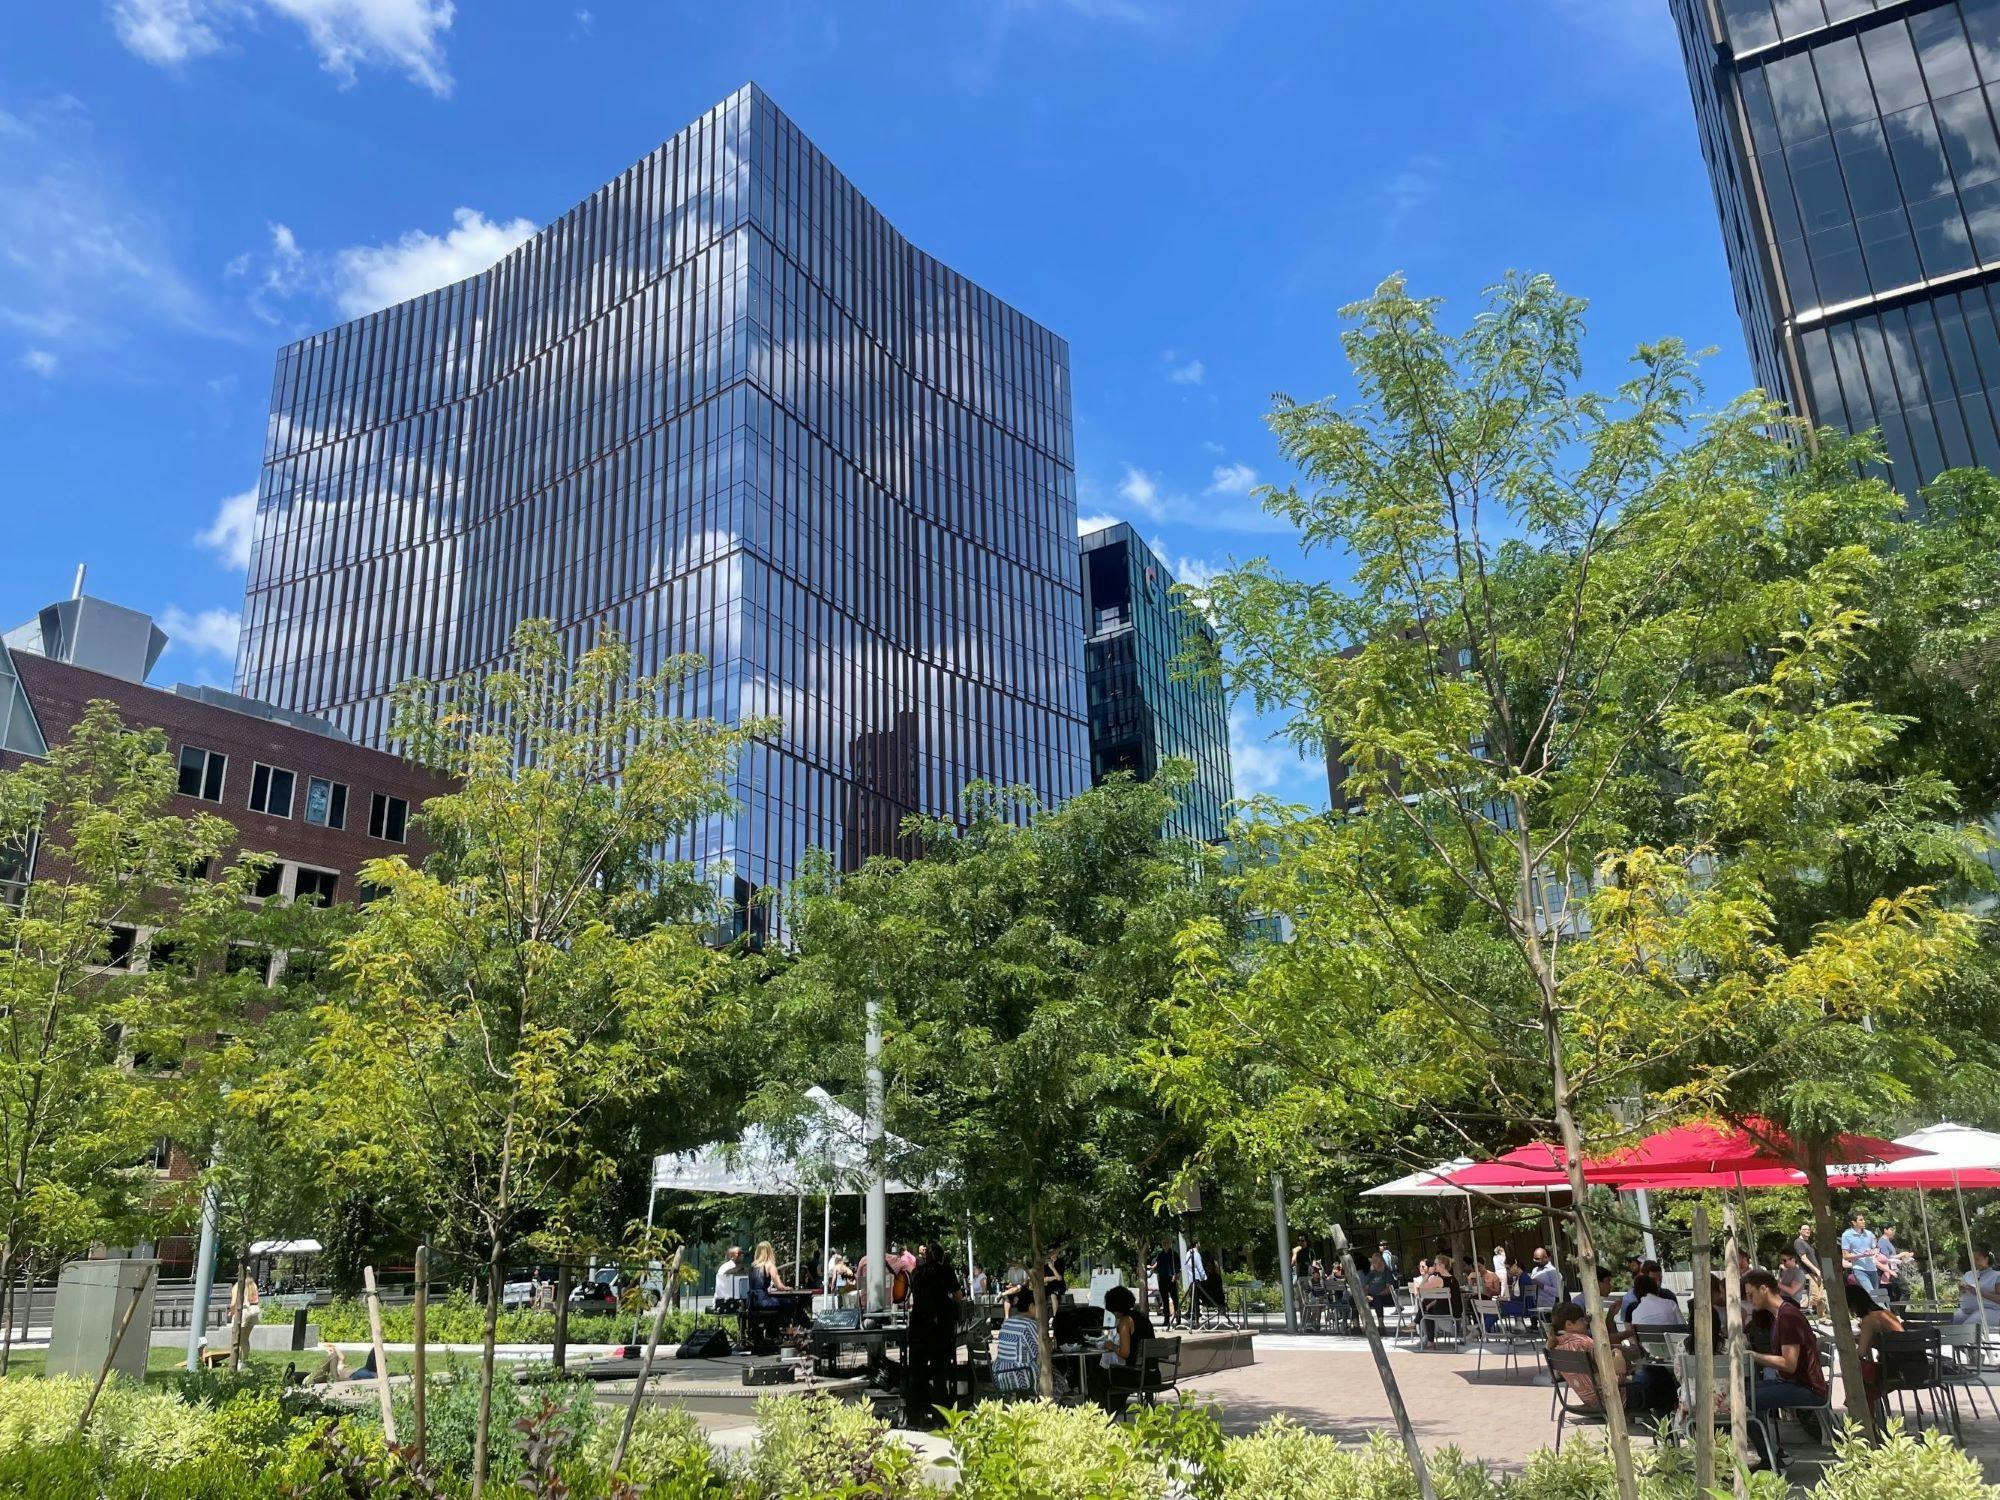 Kendall Square at MIT